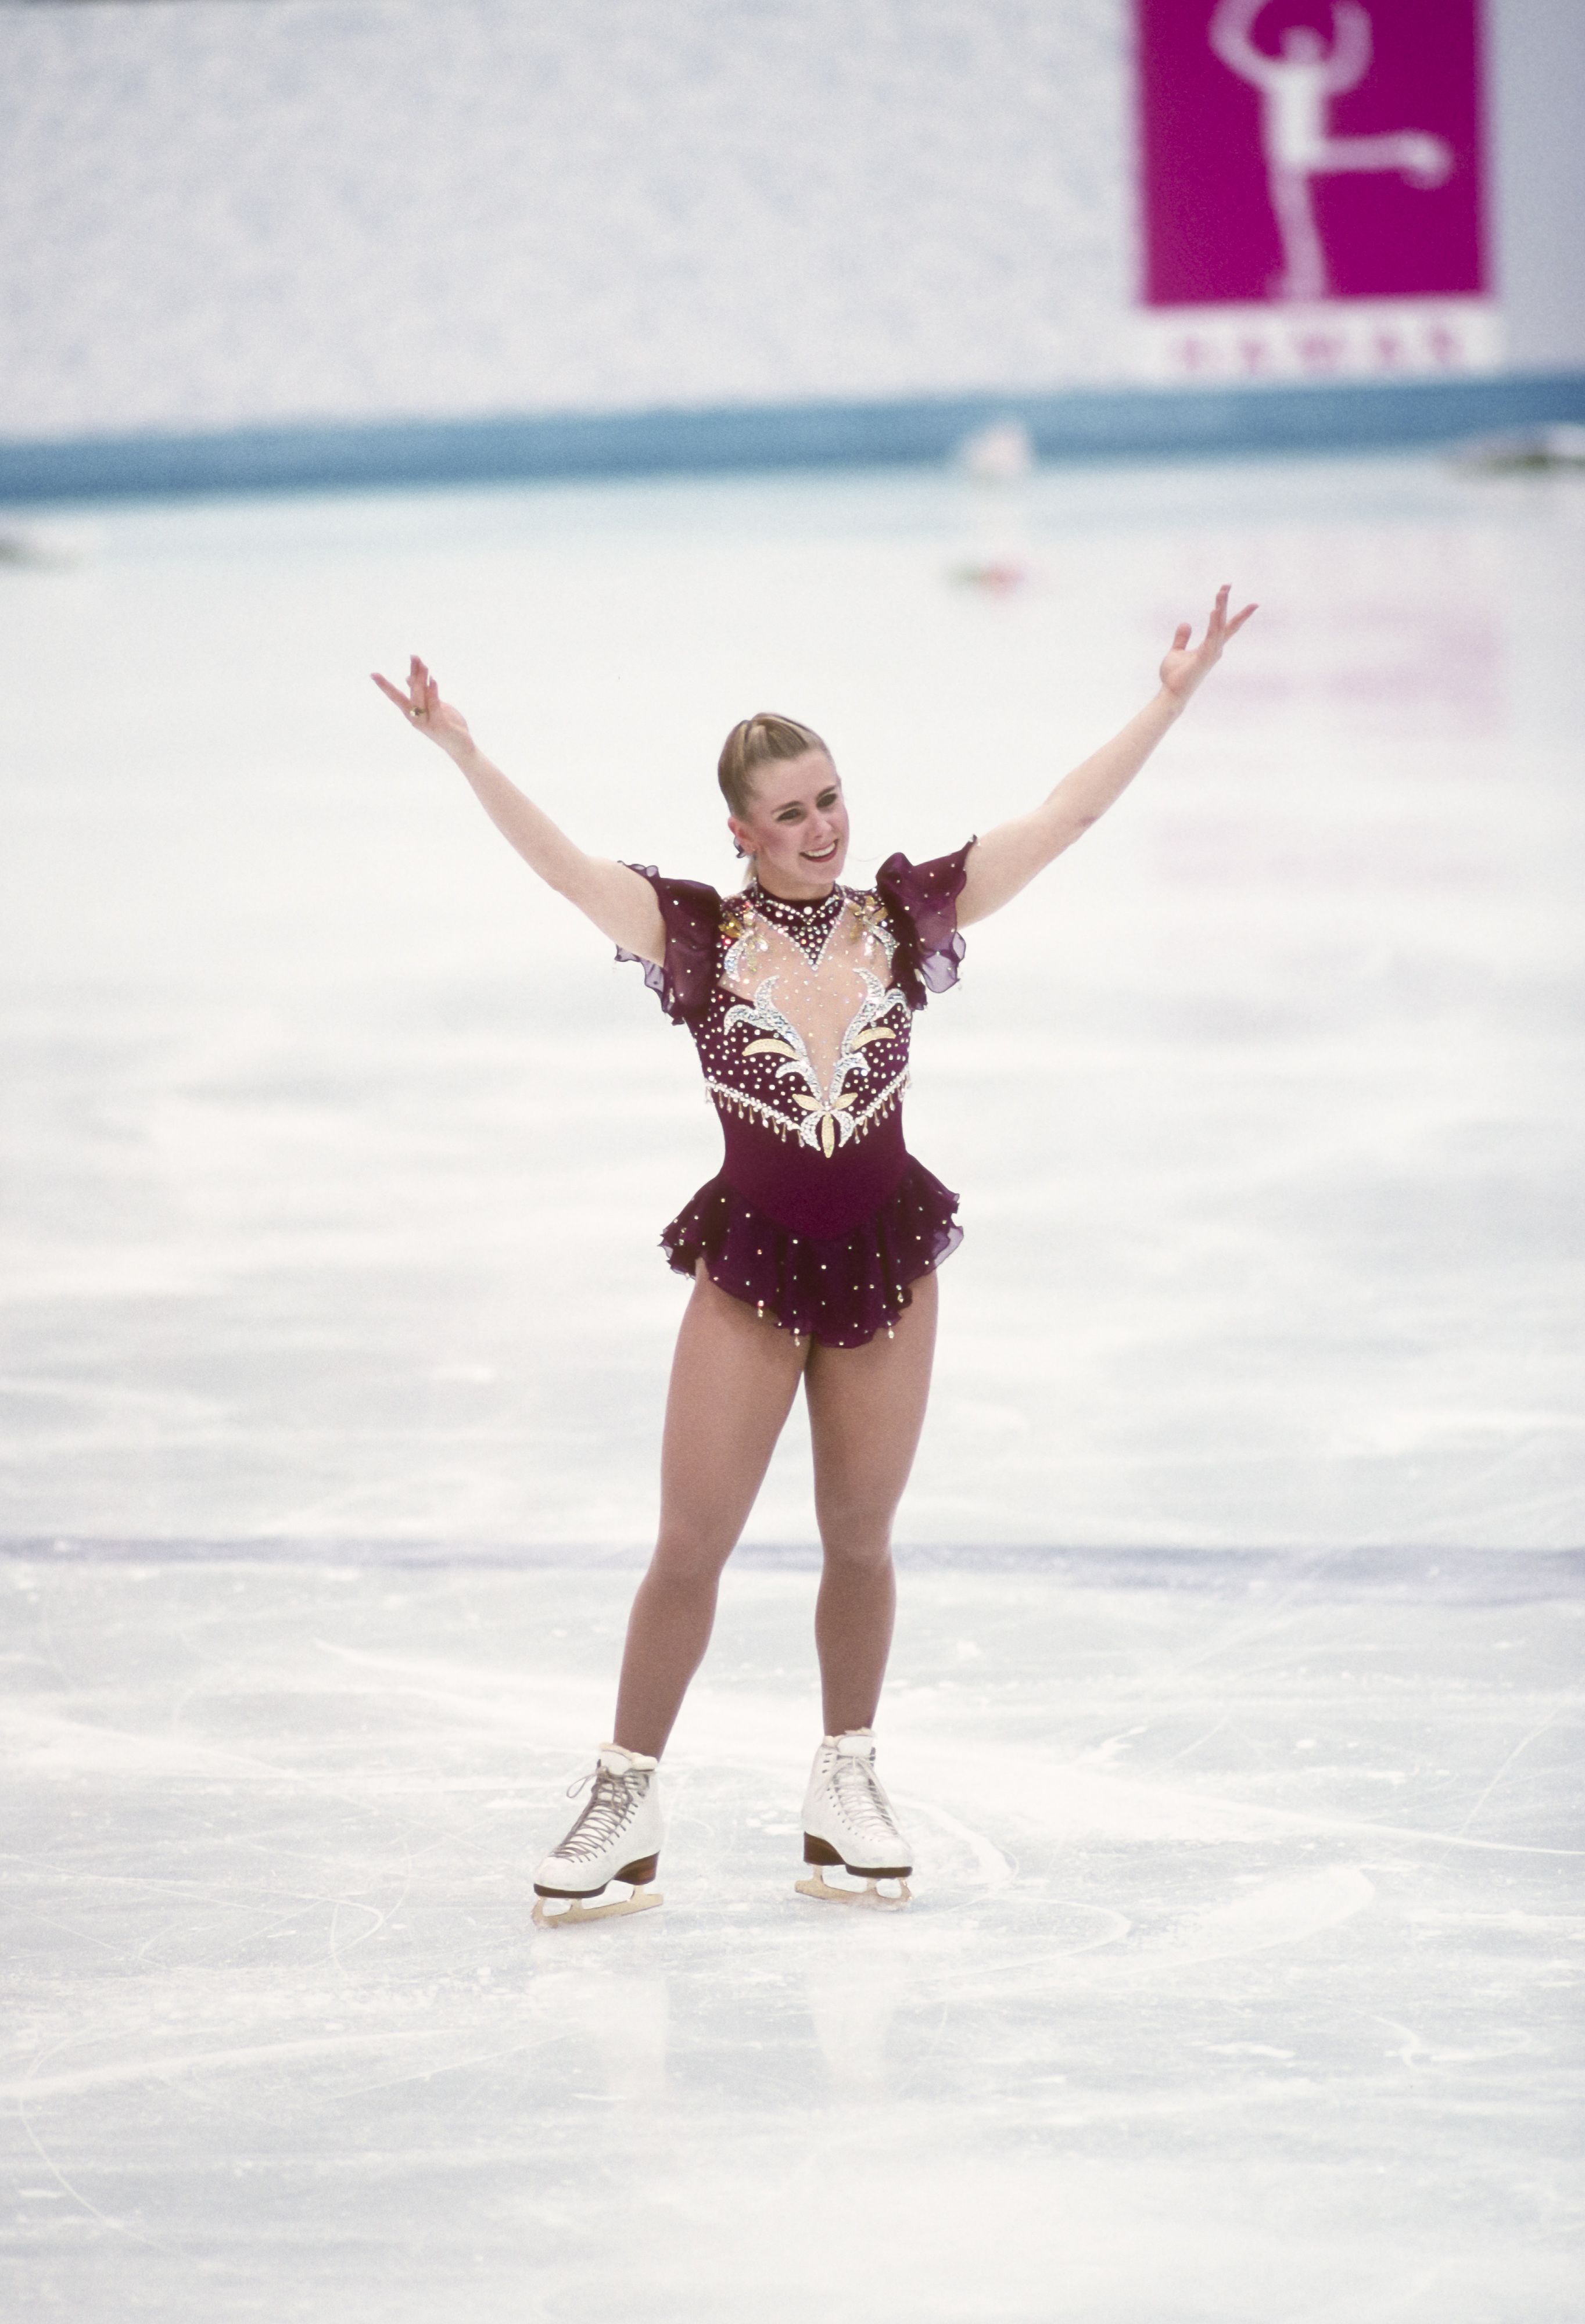 Best Figure Skating Outfits of All Time